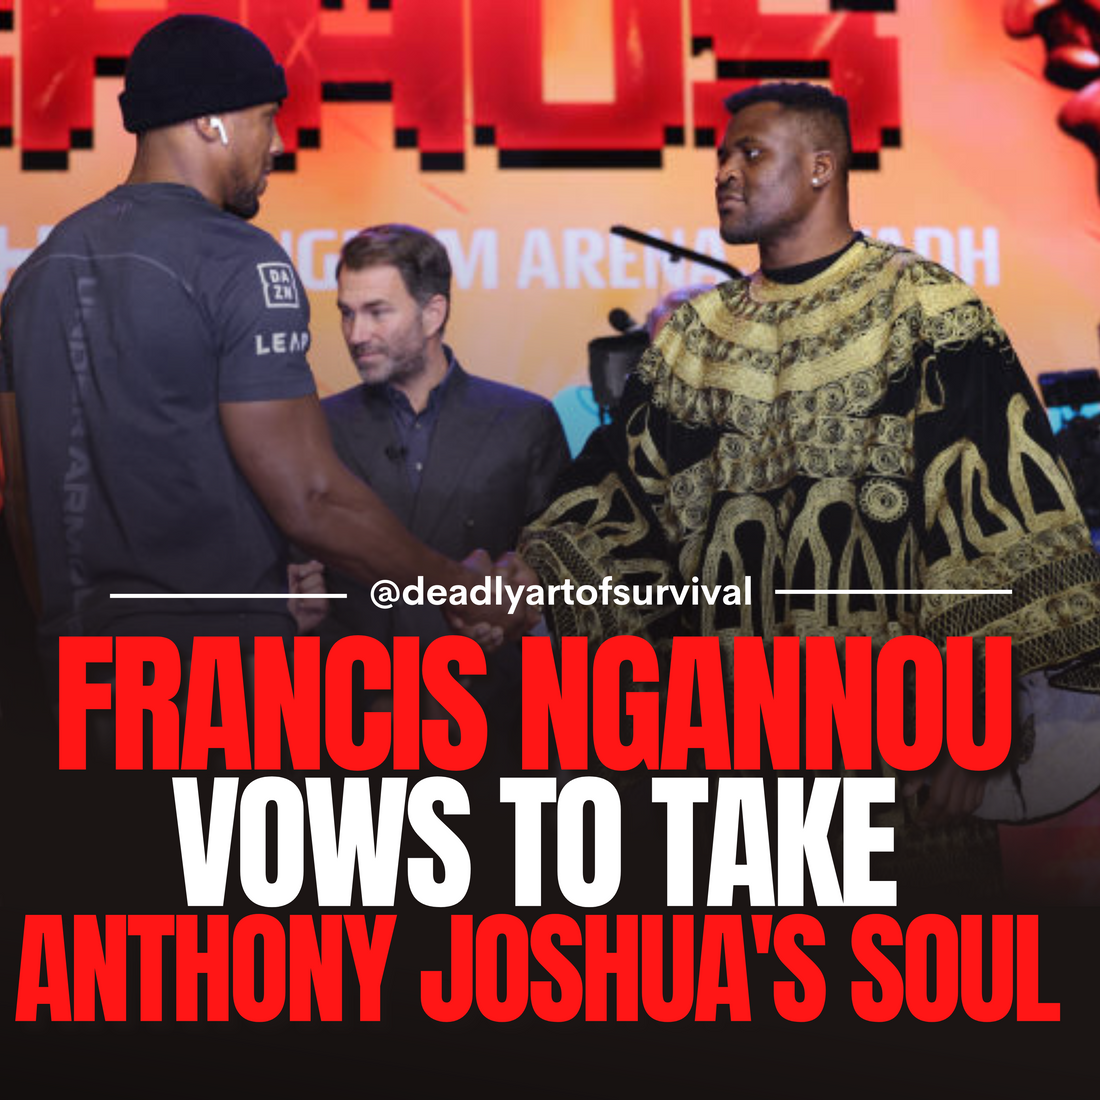 Ngannou-s-Bold-Pledge-Vows-to-Take-Anthony-Joshua-s-Soul-in-March-Super-Fight deadlyartofsurvival.com